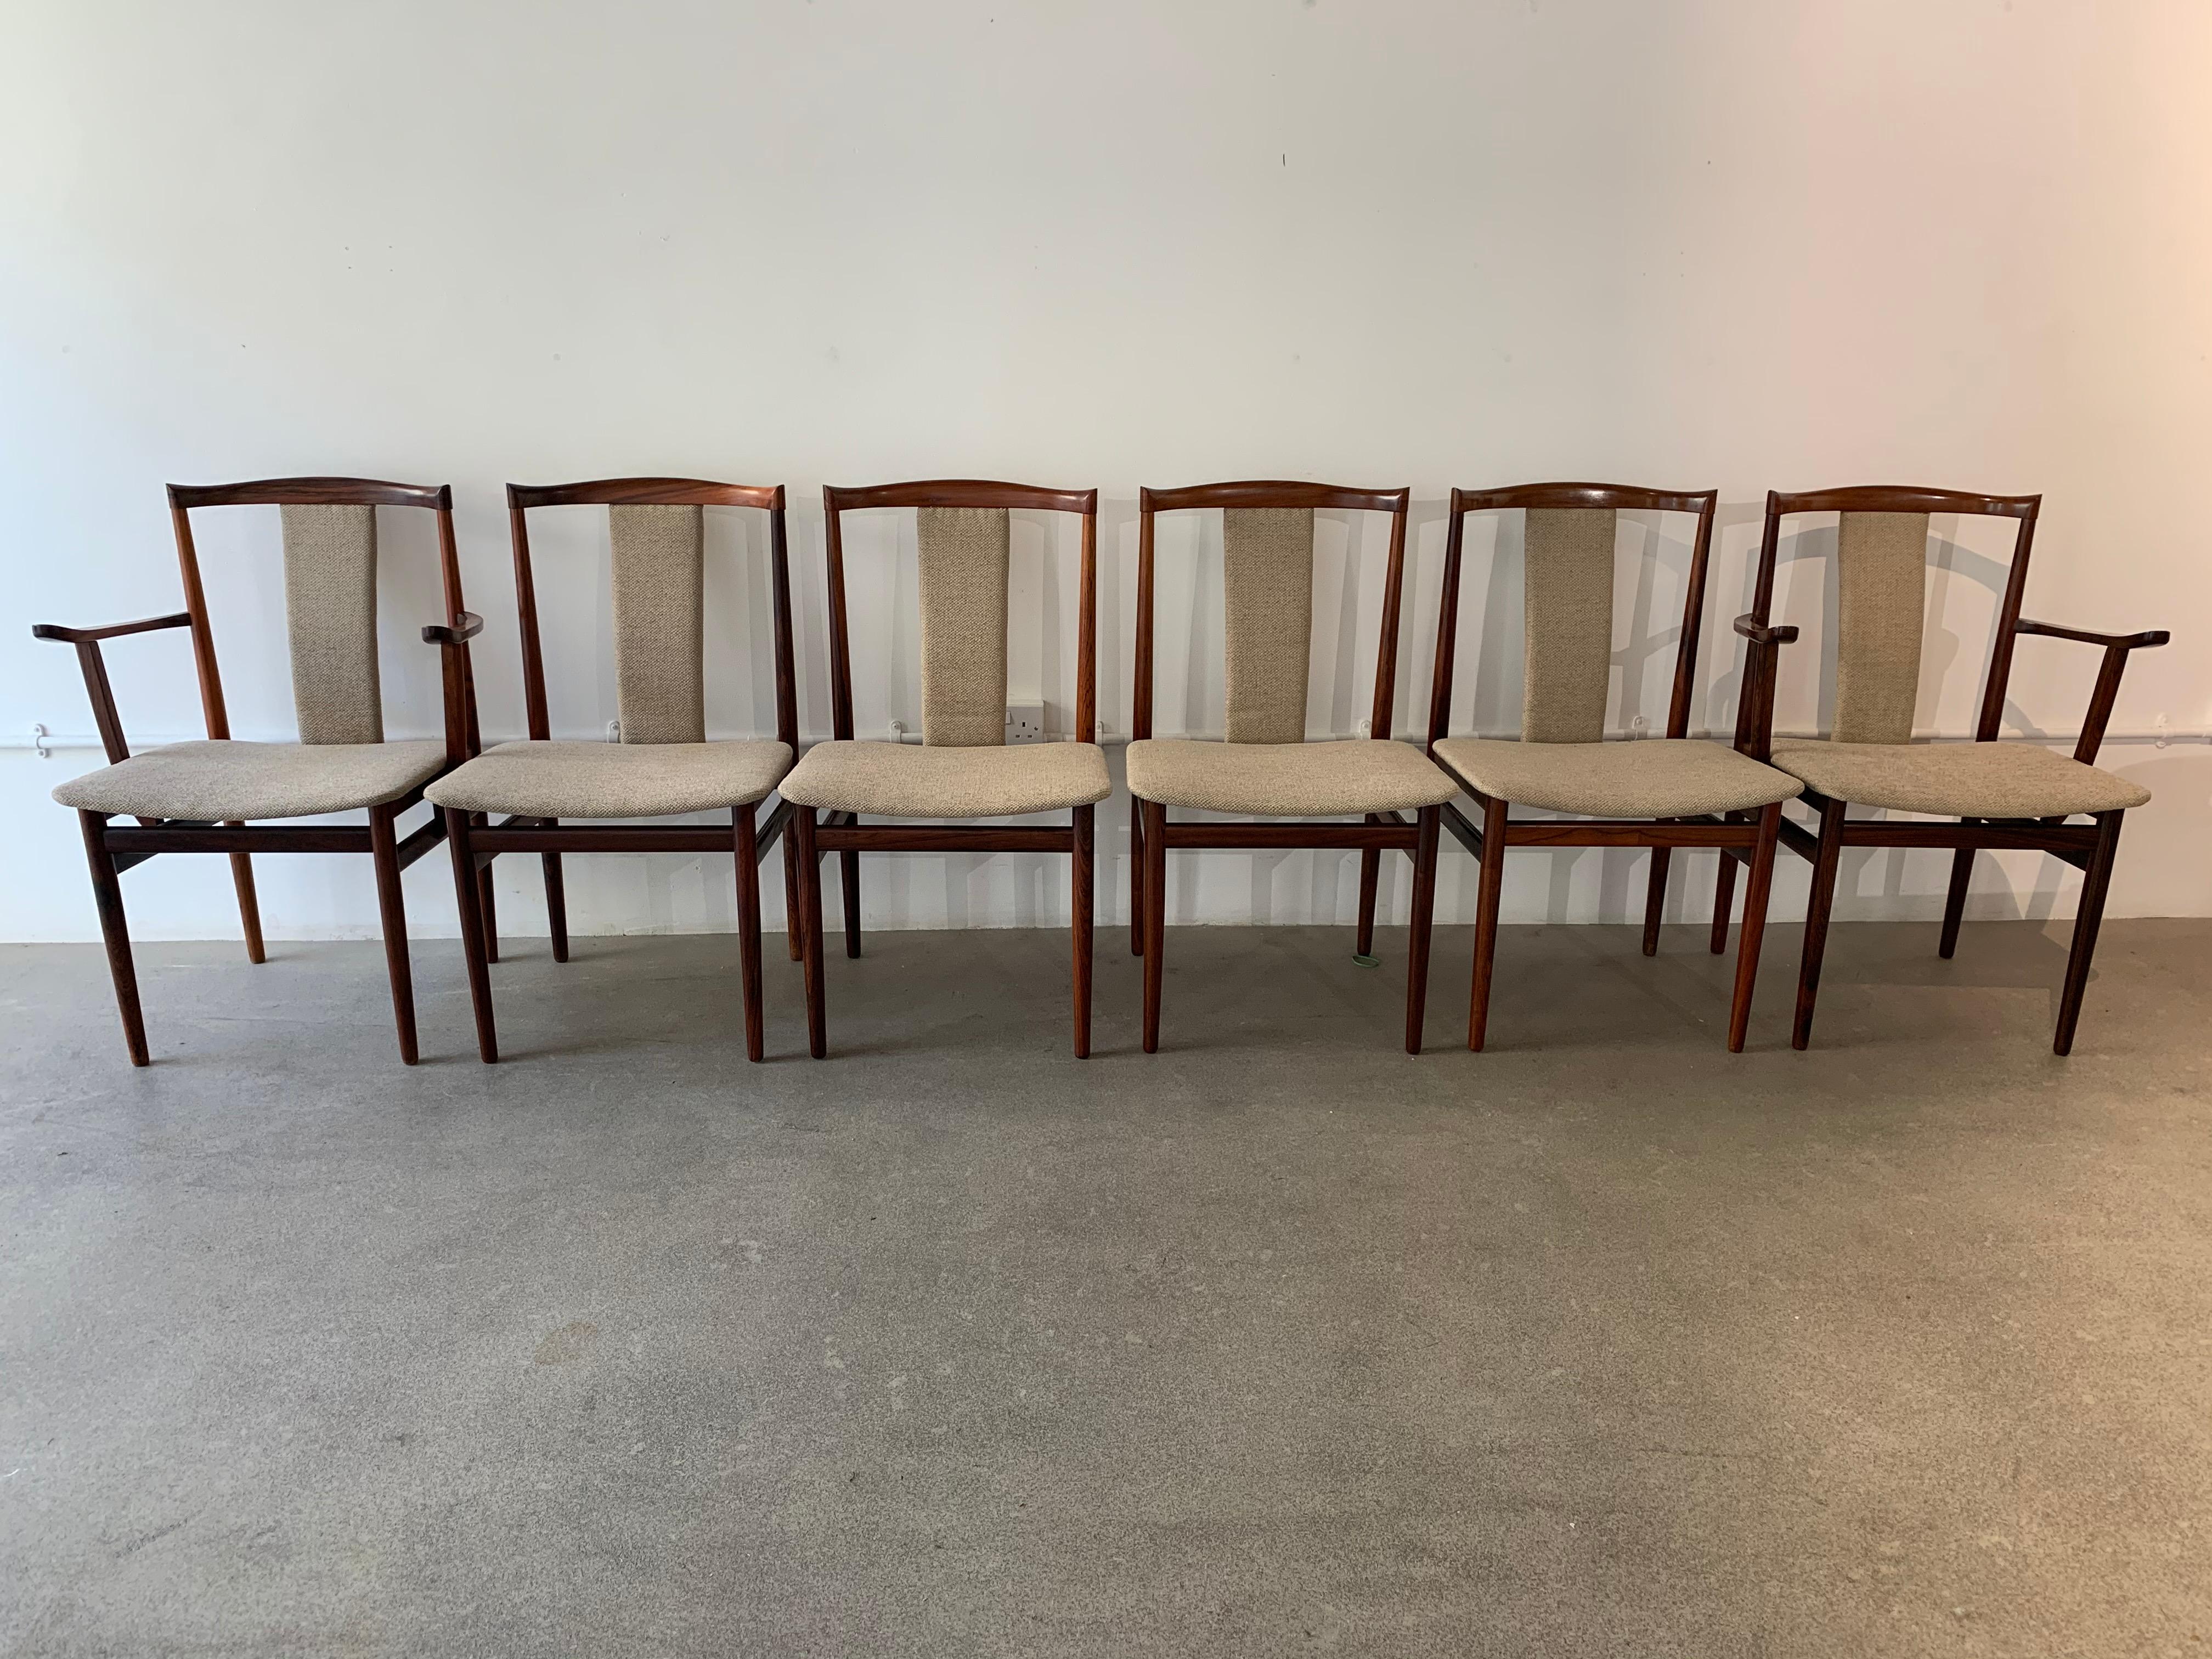 A stunning set of 6 rosewood dining chairs comprised of two carvers and four chairs with their backs and seats recently recovered in a thick, textured, natural oatmeal, bouclé fabric. Designed by Henning Sorensen for Dan-ex in 1968.

Each chair